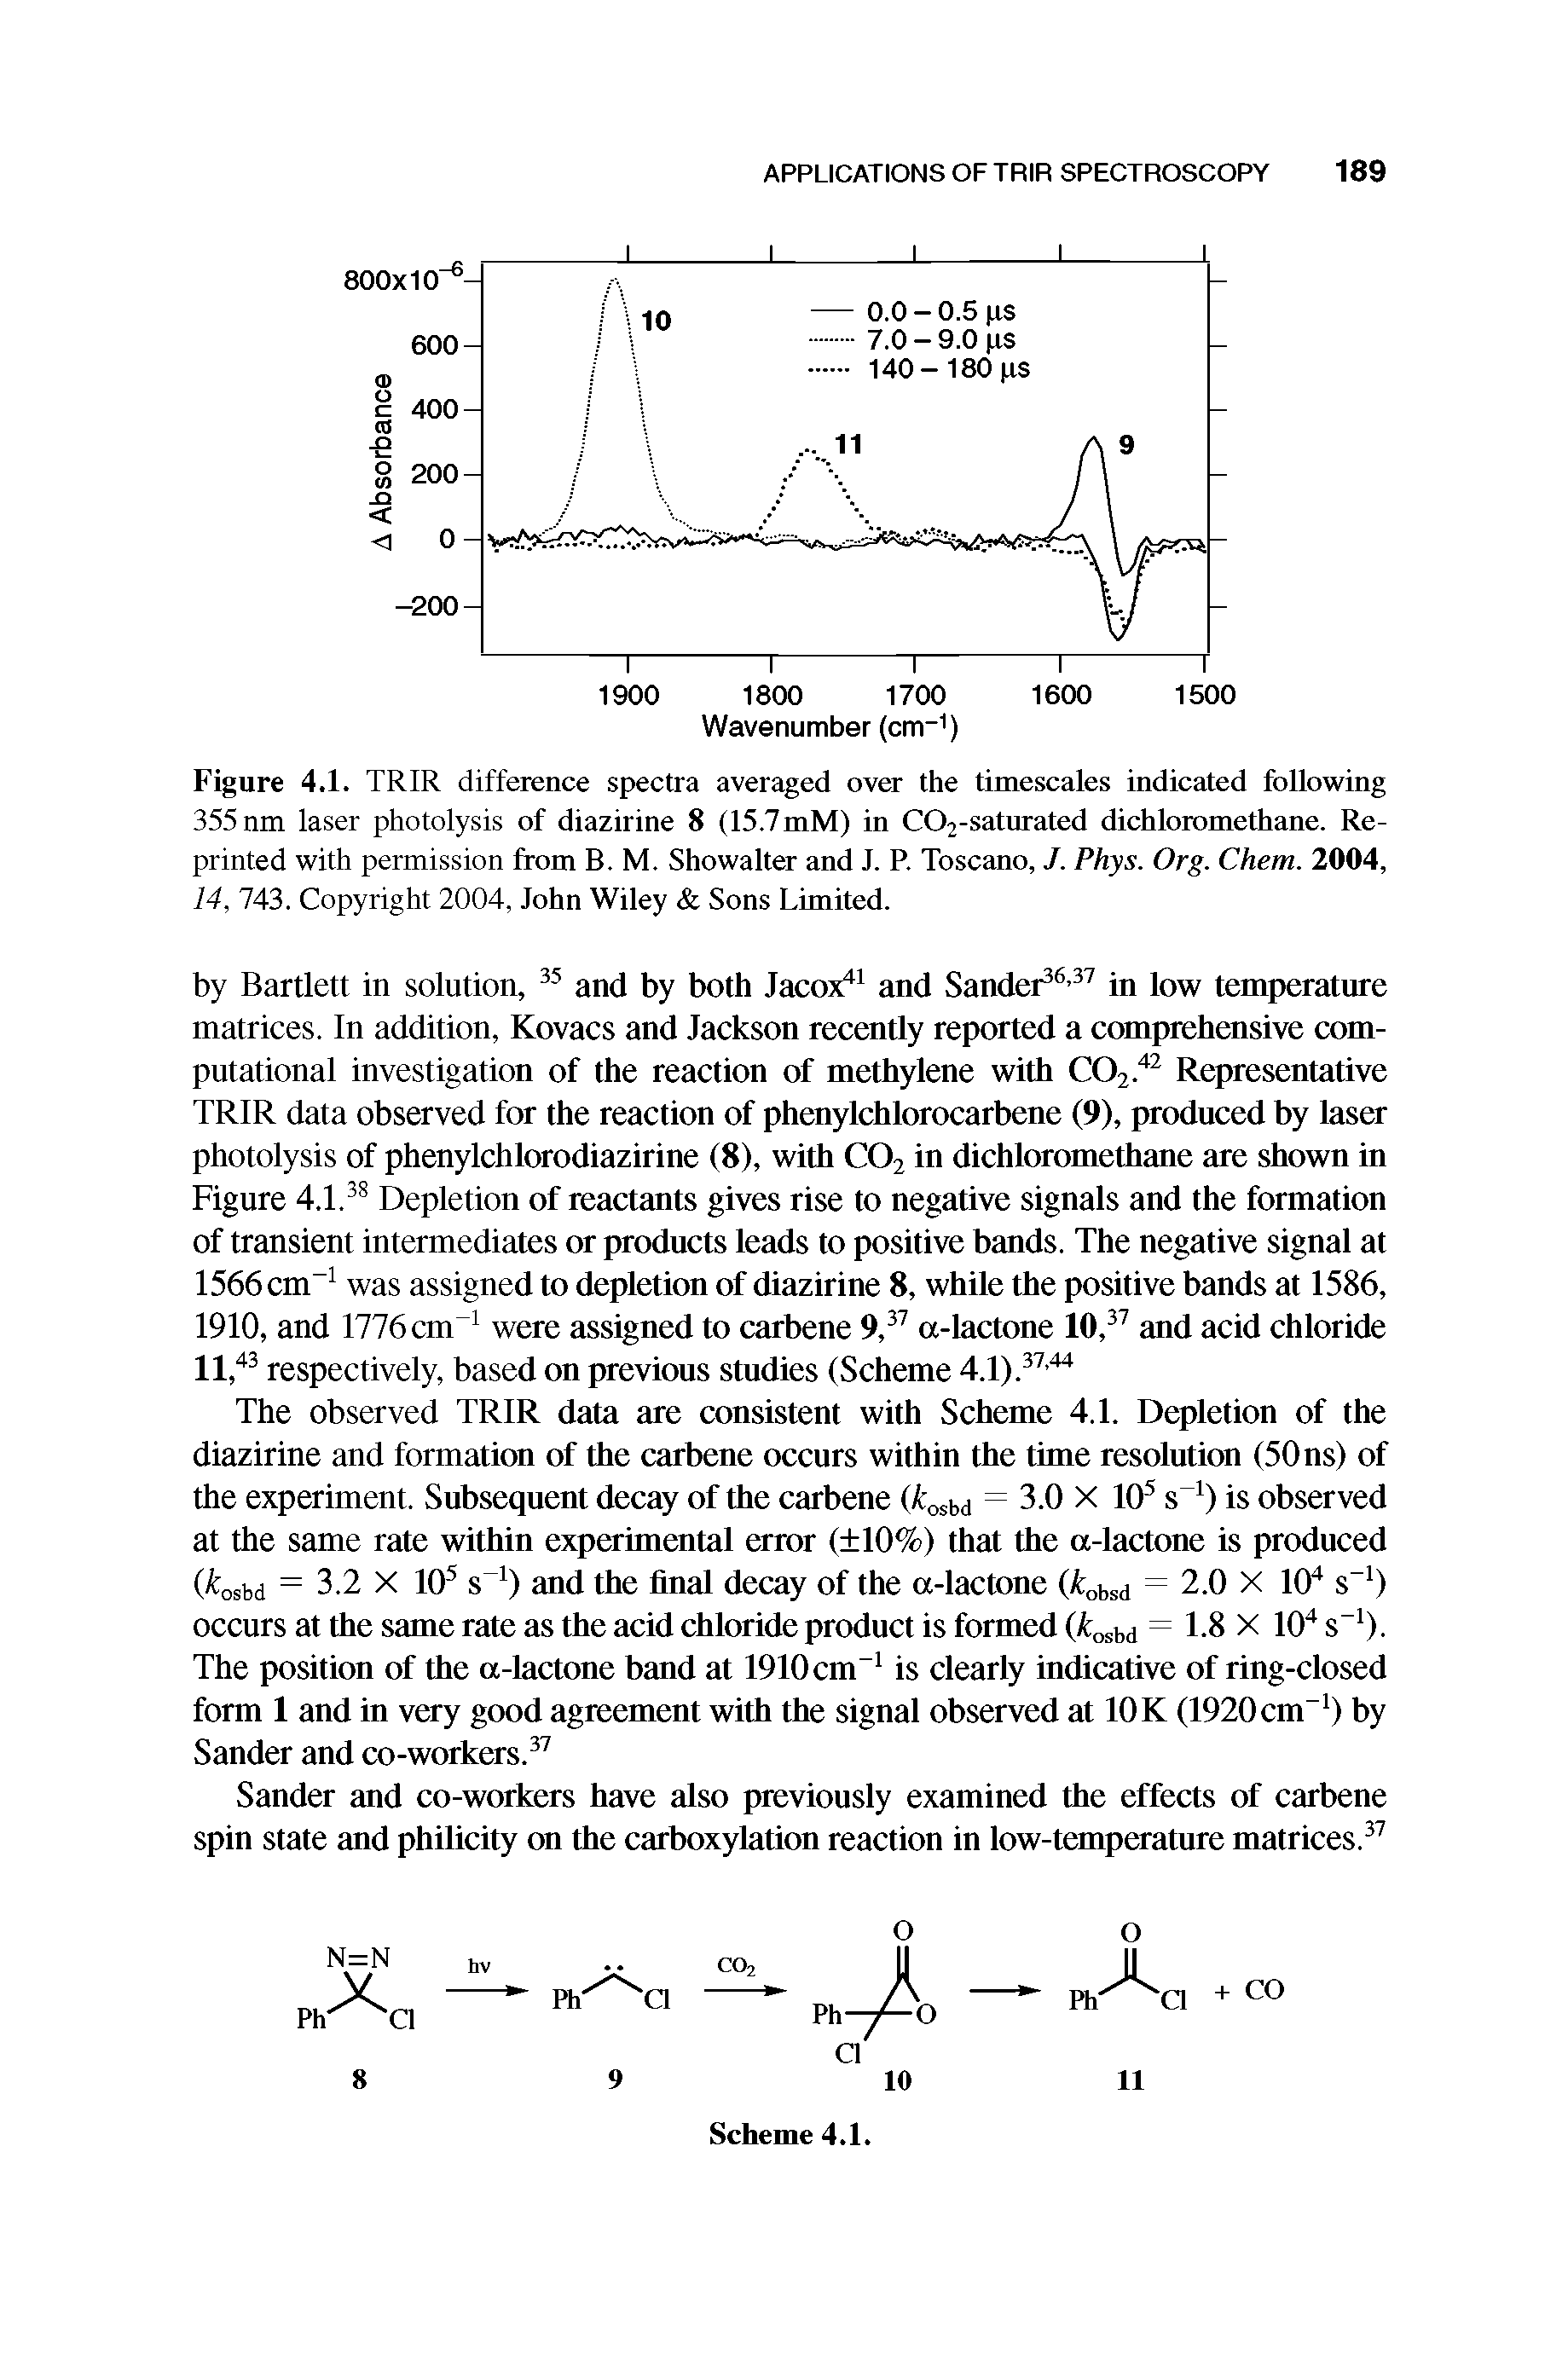 Figure 4.1. TRIR difference spectra averaged over the timescales indicated following 355 nm laser photolysis of diazirine 8 (15.7mM) in C02-satnrated dichloromethane. Reprinted with permission from B. M. Showalter and J. P. Toscano, J. Phys. Org. Chem. 2004, 14, 743. Copyright 2004, John Wiley Sons Limited.